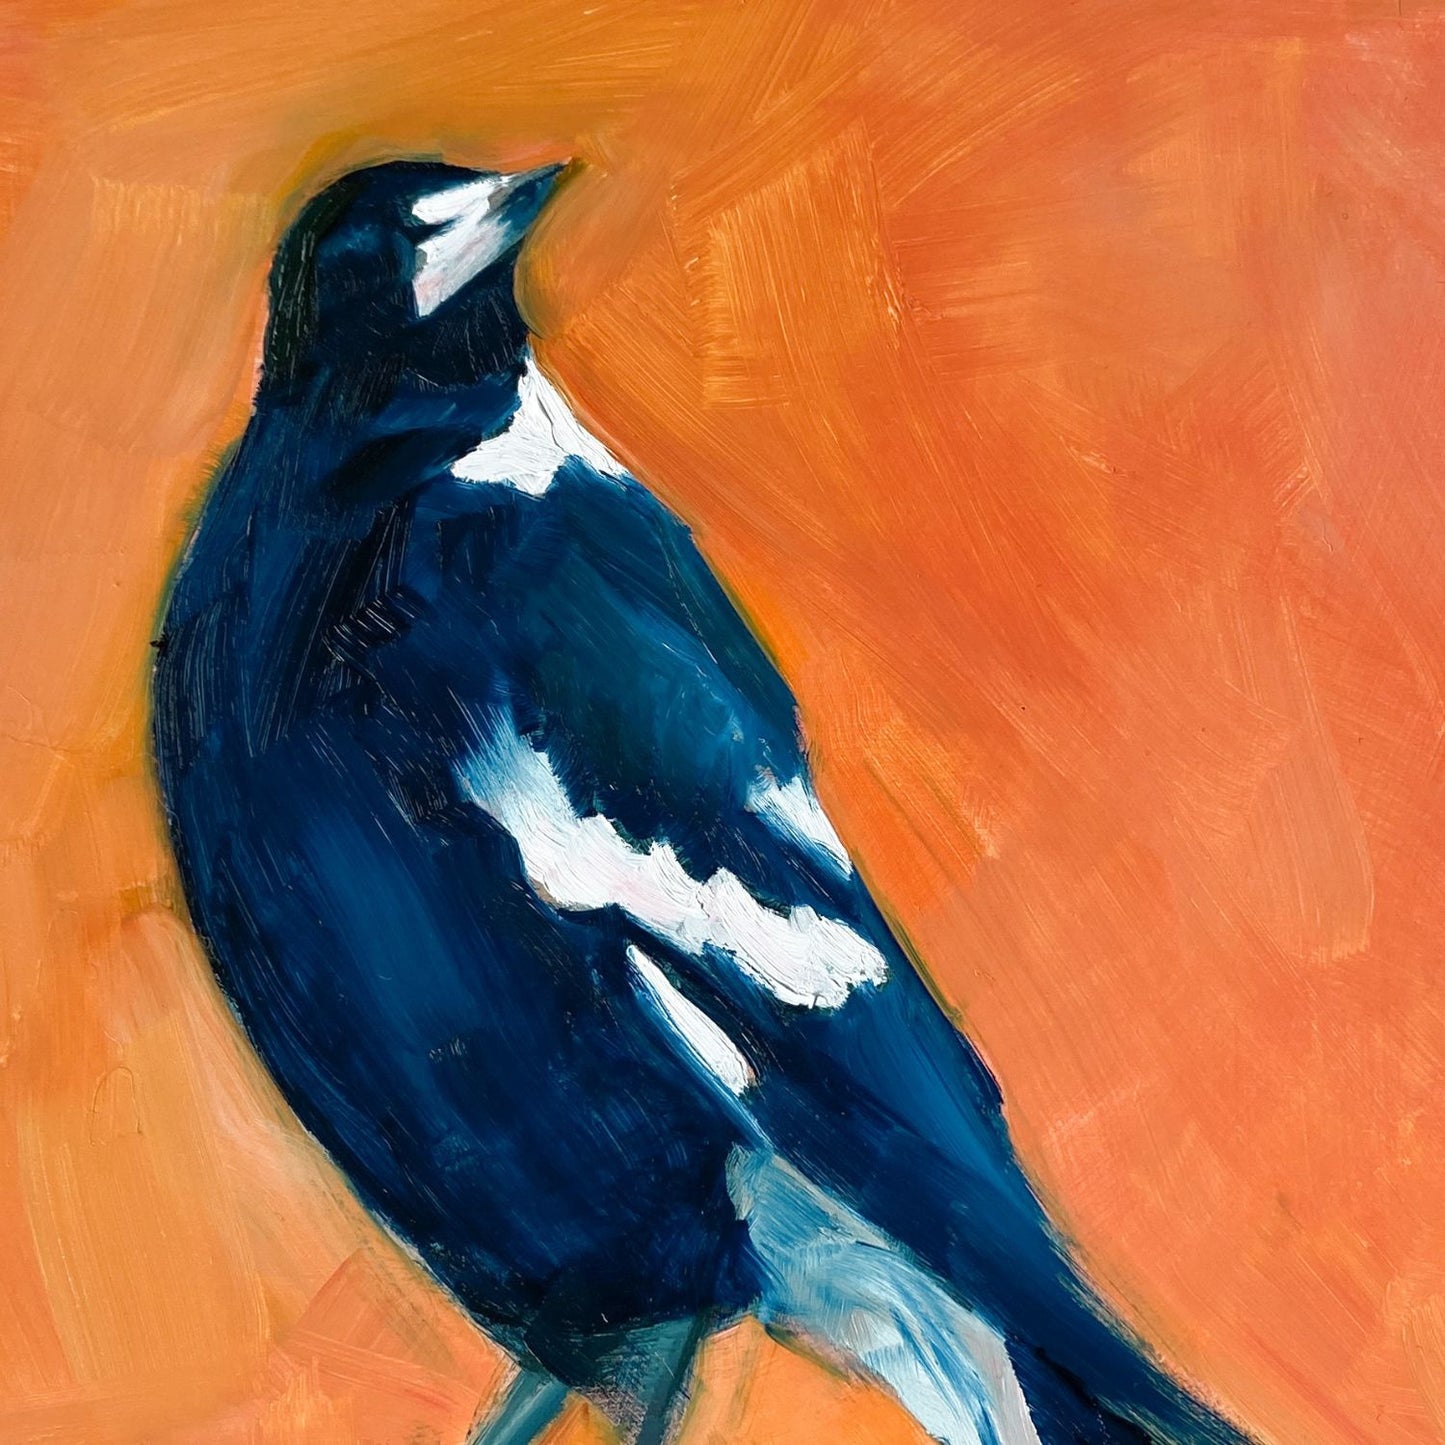 closeup of an image of an impressionistic oil painting of a navy blue and white magpie looking up on a bright and textured orange background